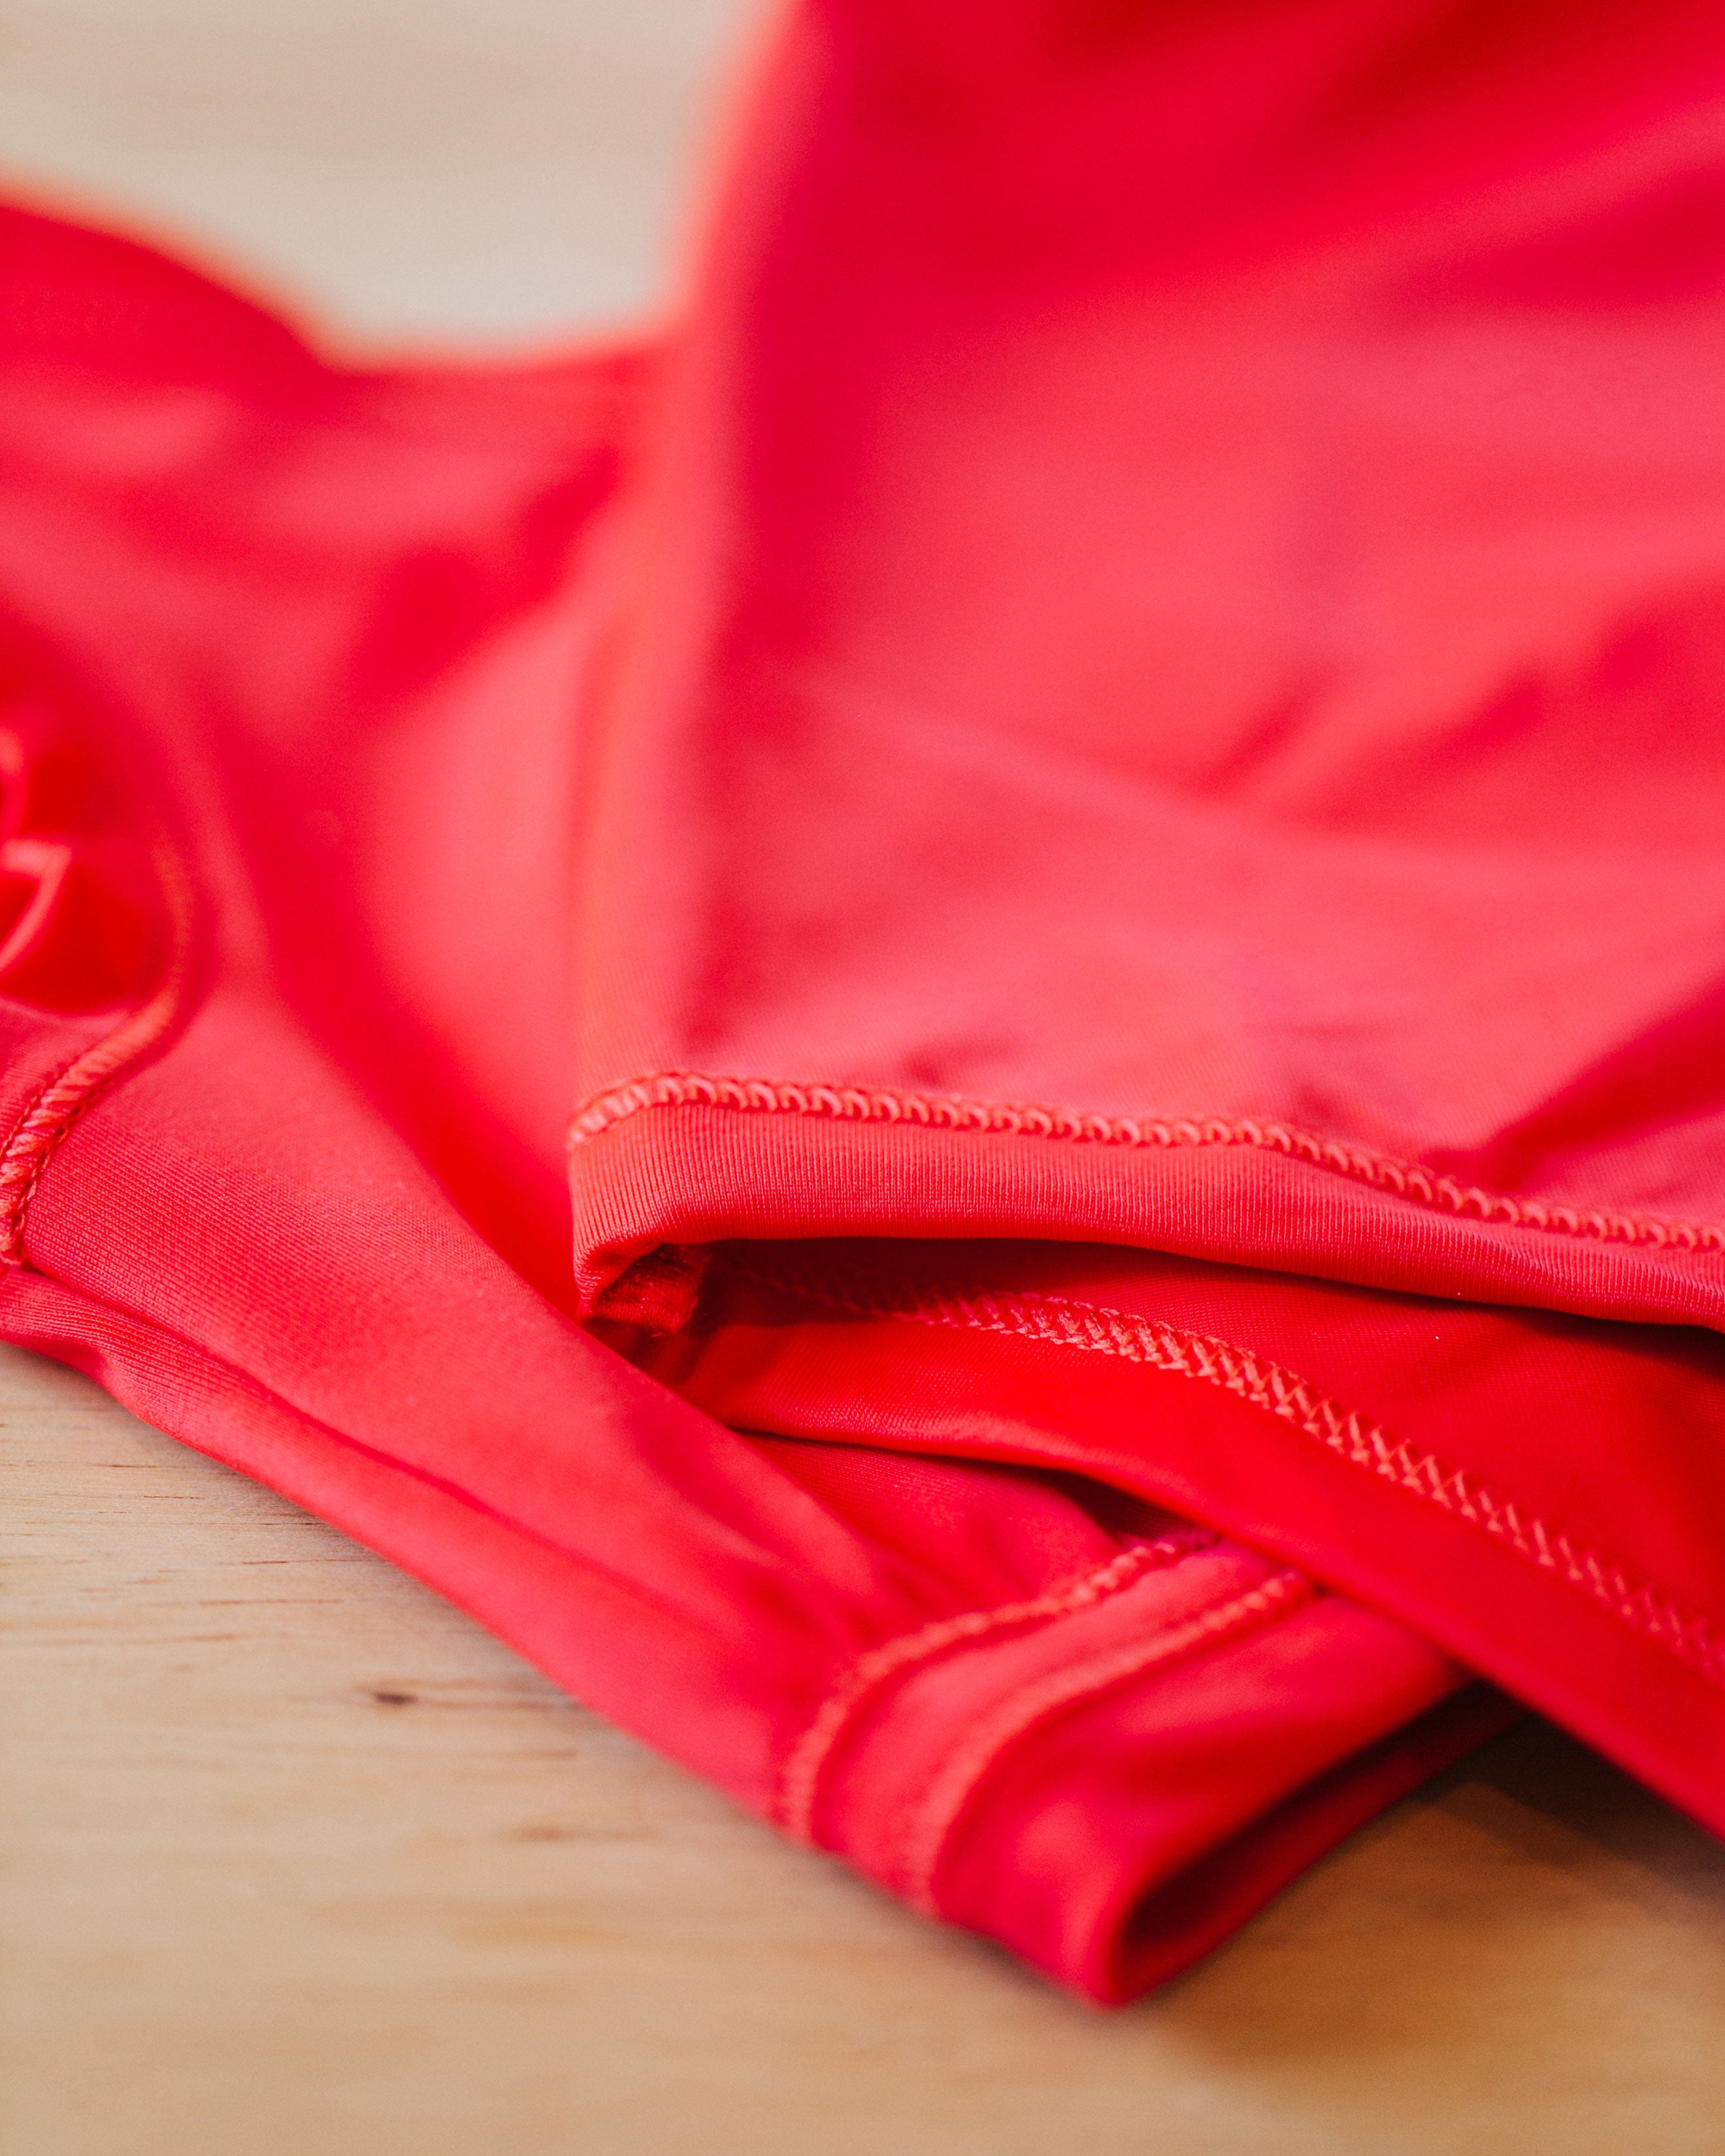 Close up of the Classic Red swimwear, showing the stitching and details.